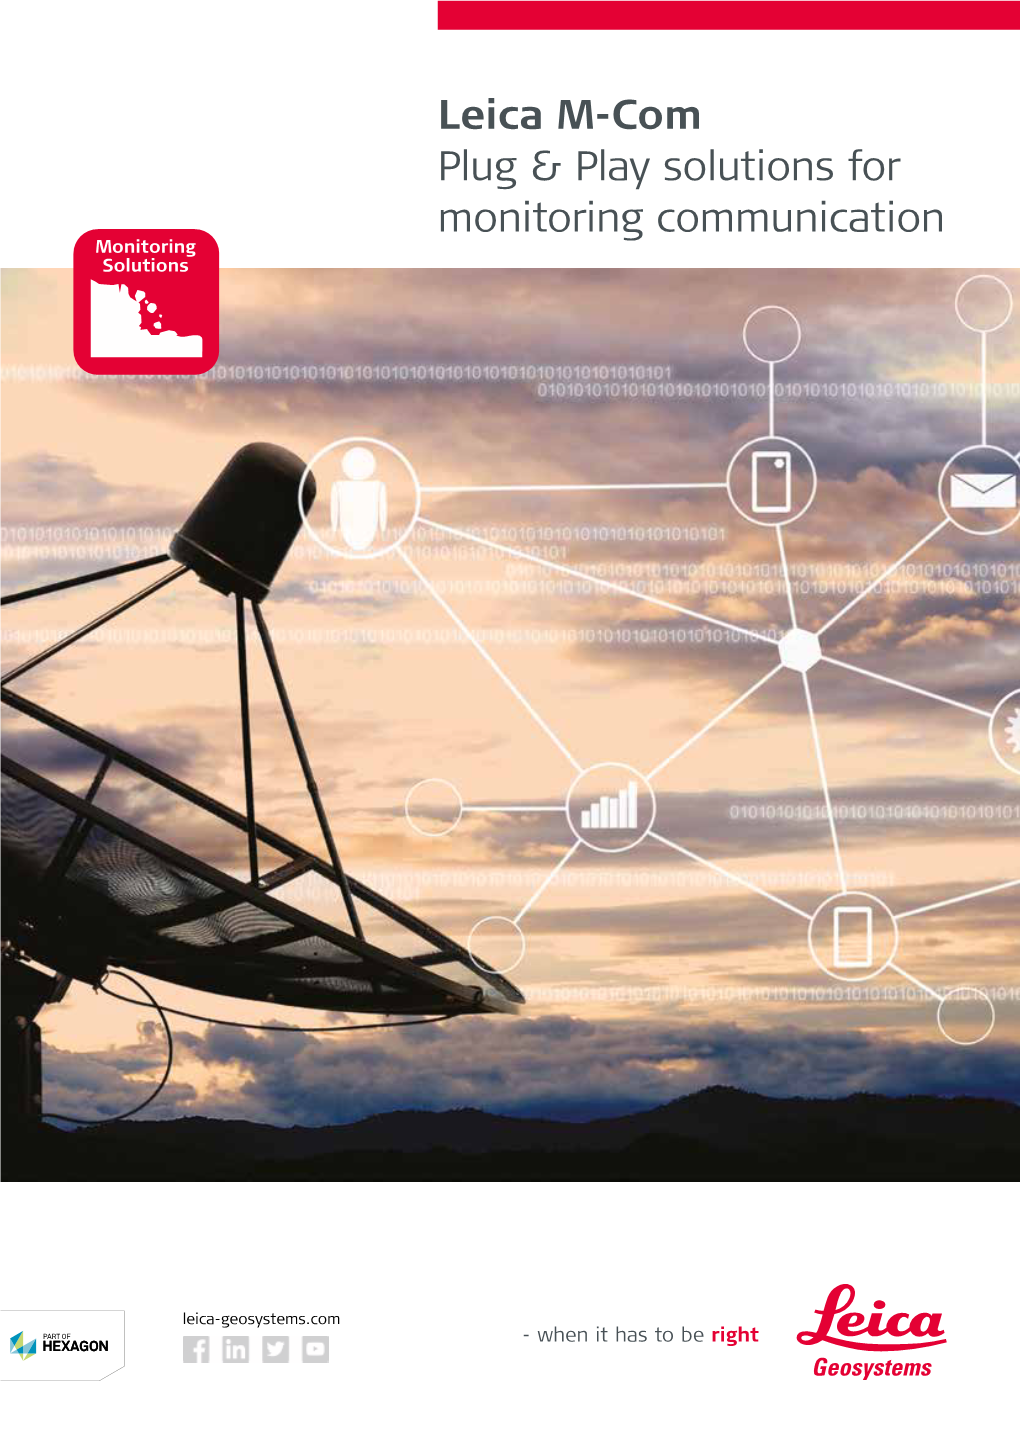 Leica M-Com Plug & Play Solutions for Monitoring Communication